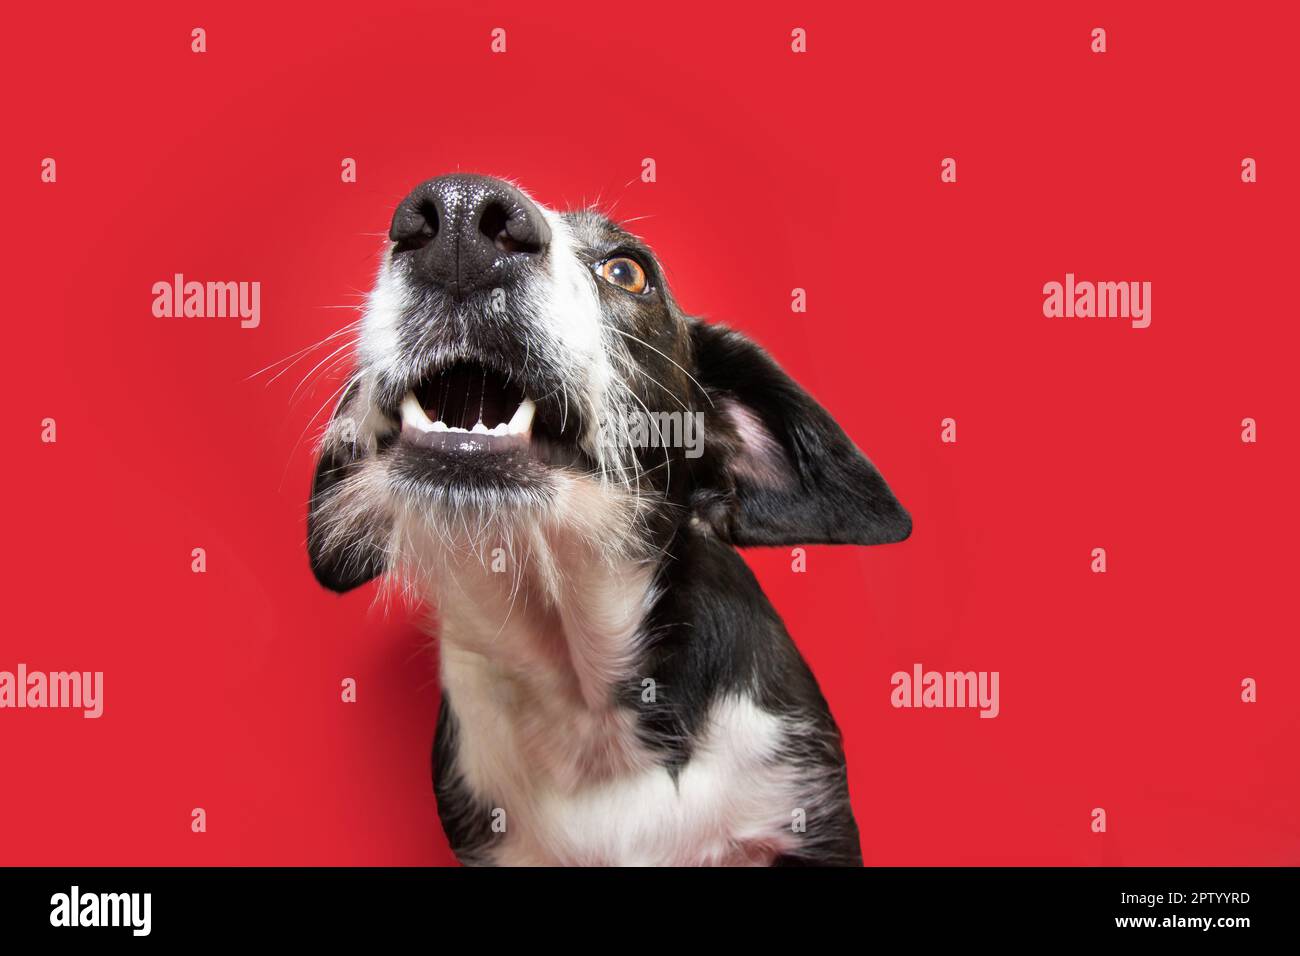 Portrait funny puppy dog with open mouth begging food. Isolated on red magenta background Stock Photo